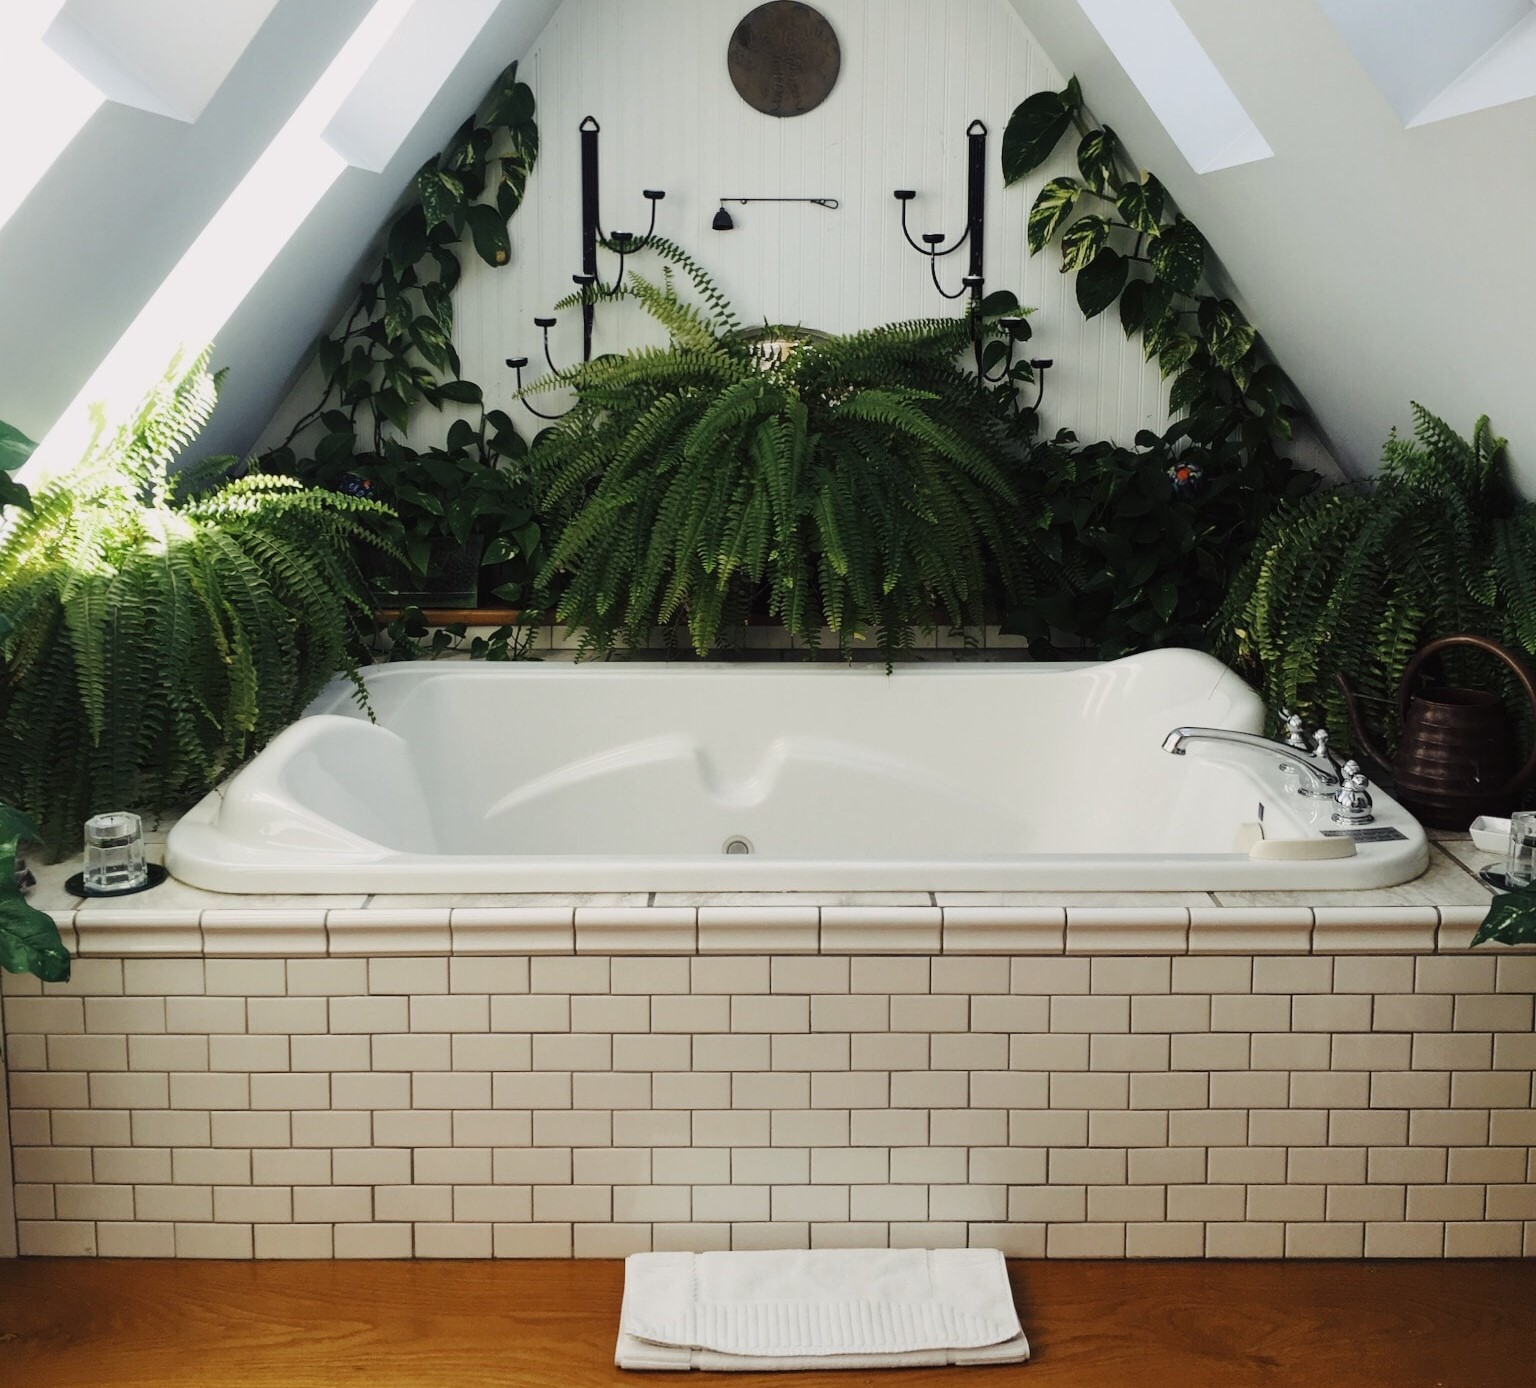 A tranquil oasis in your home - a drop-in bathtub